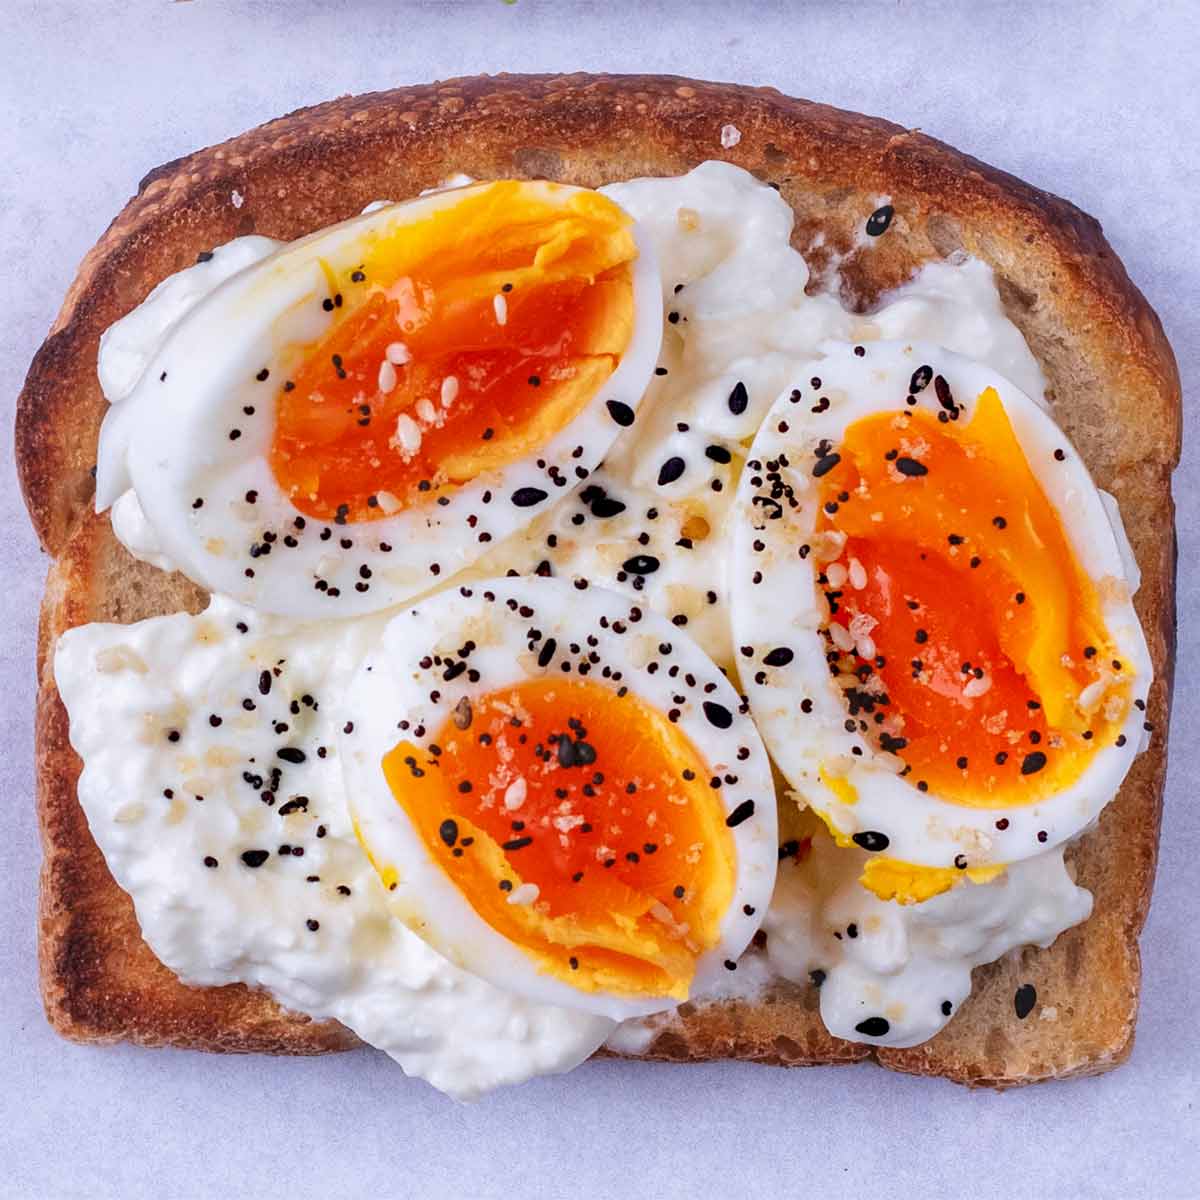 Sliced boiled eggs and seasoning on top of cottage cheese on toast.